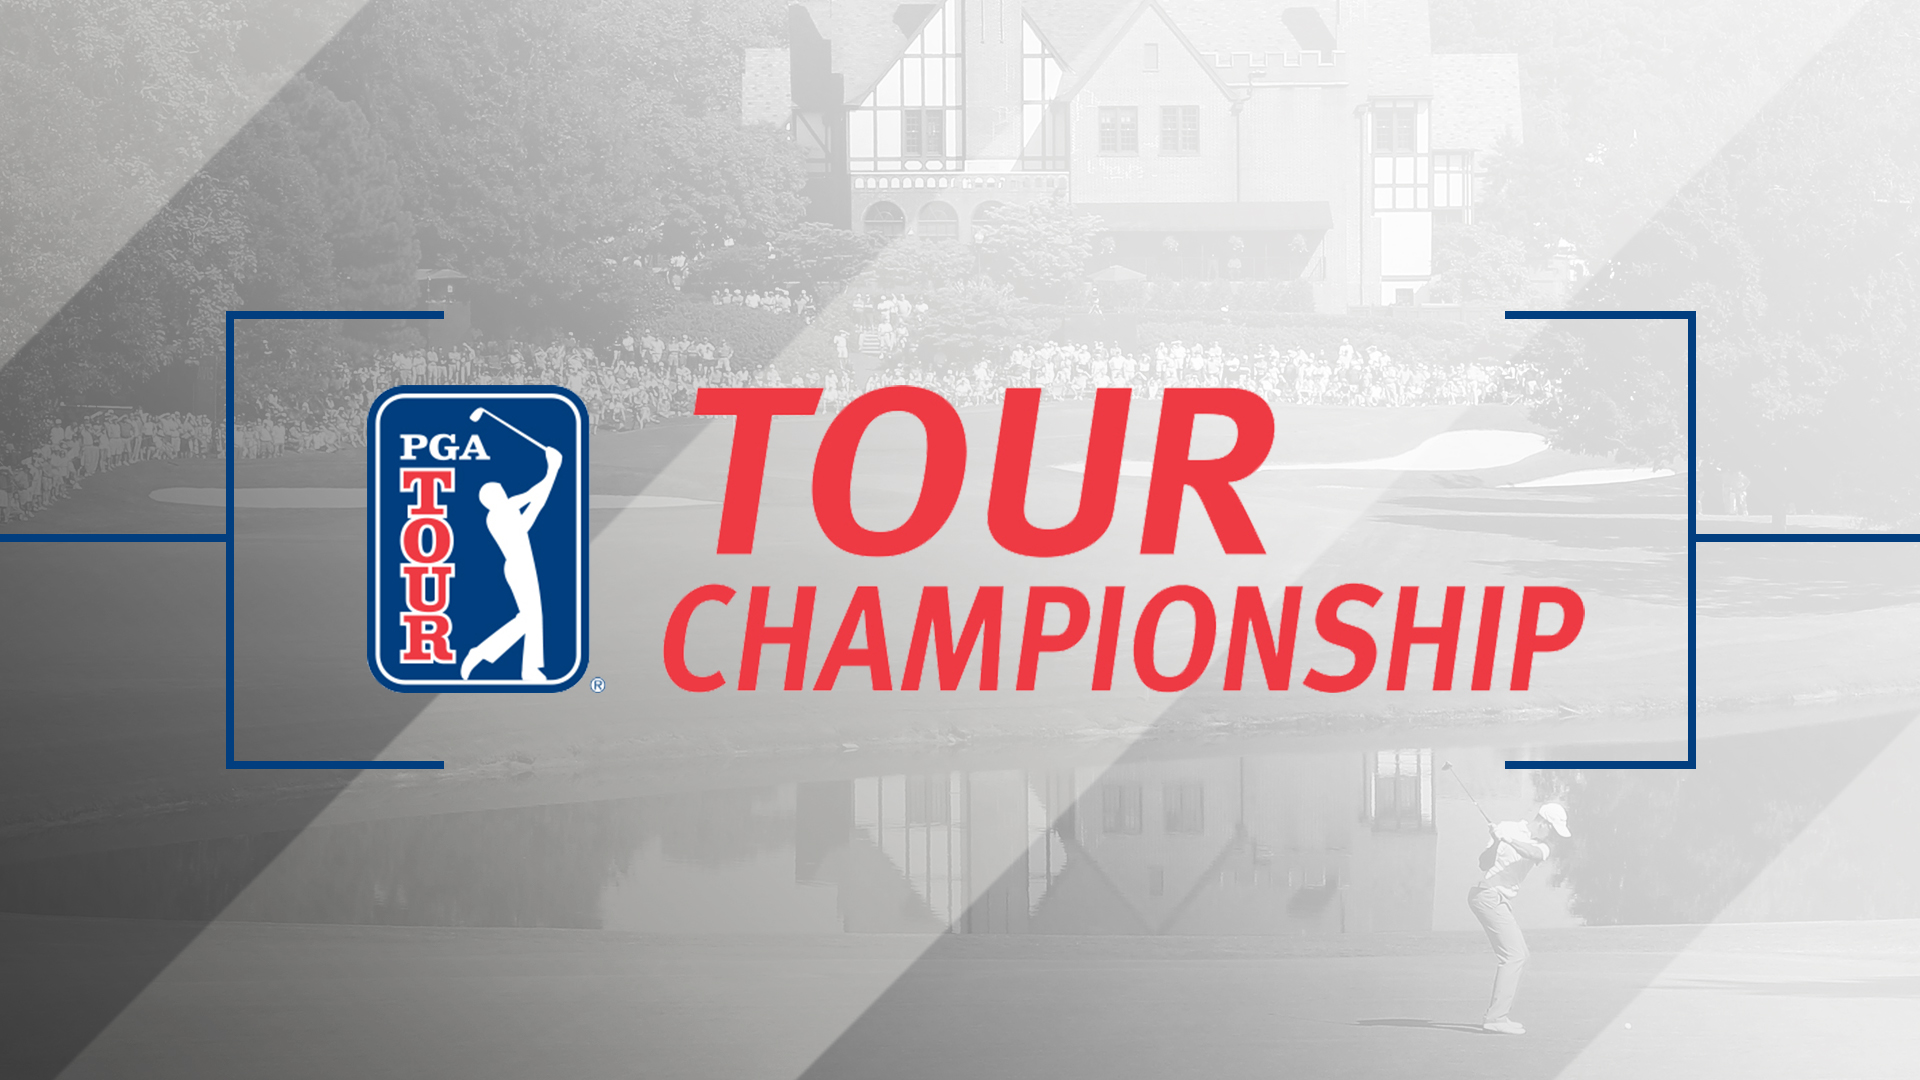 PGA Tour Championship Tee times, TV schedule & online streaming